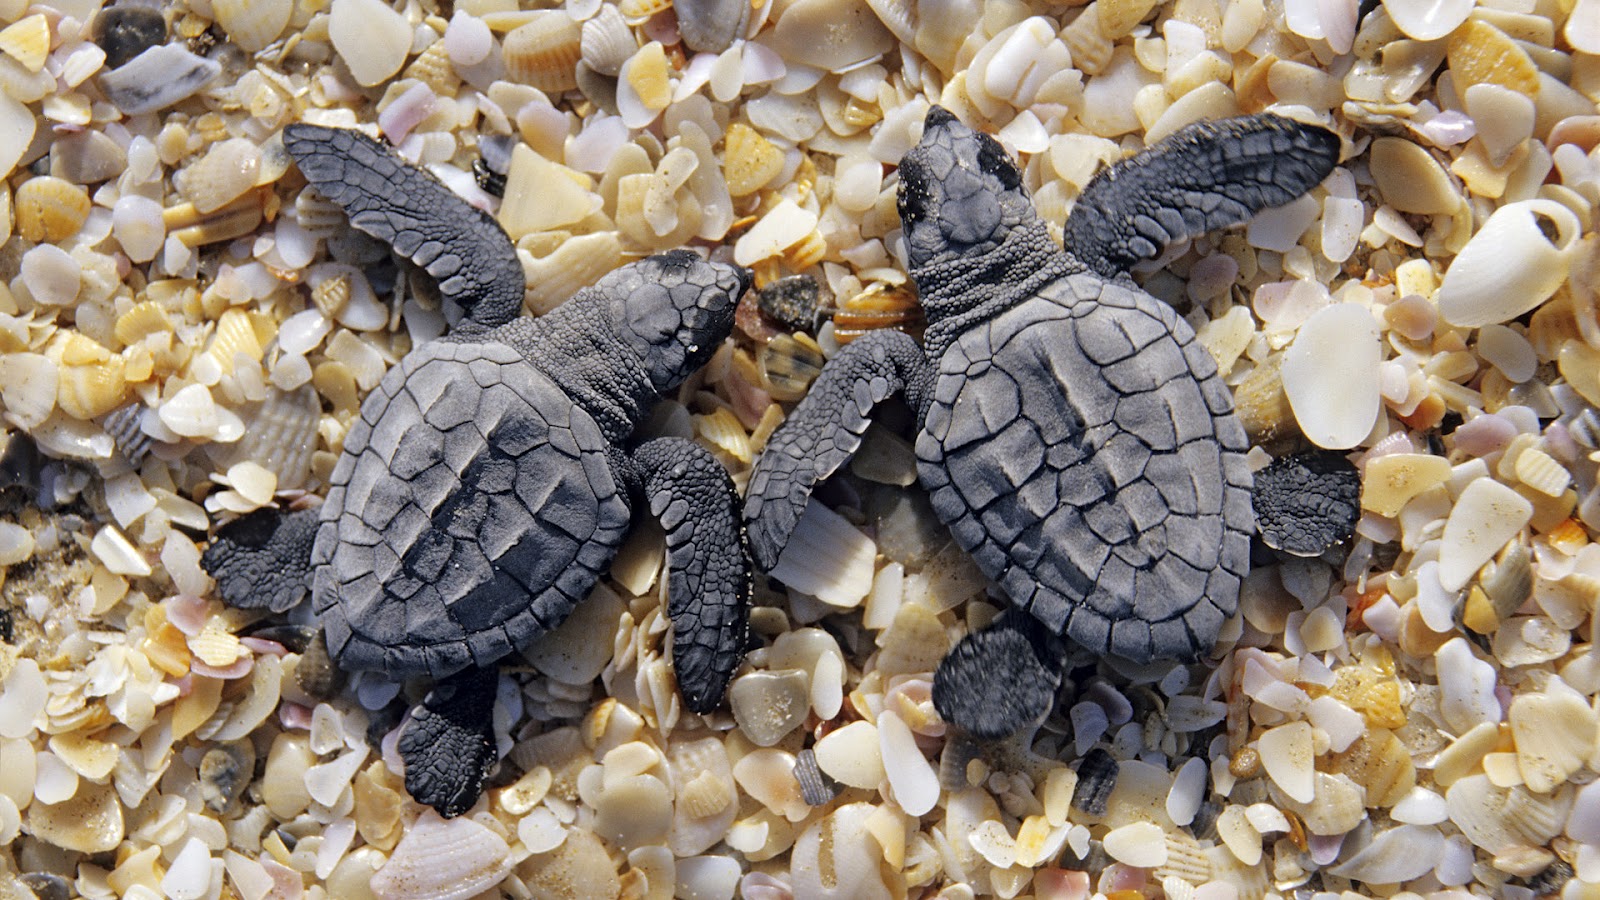 http://3.bp.blogspot.com/-beGr23QygNM/UCJ-A8P5pdI/AAAAAAAAAJw/2axhewUVuoc/s1600/hd-turtles-backgrounds-two-little-young-black-turtles-on-the-beach-hd-turtles-backgrounds.jpg